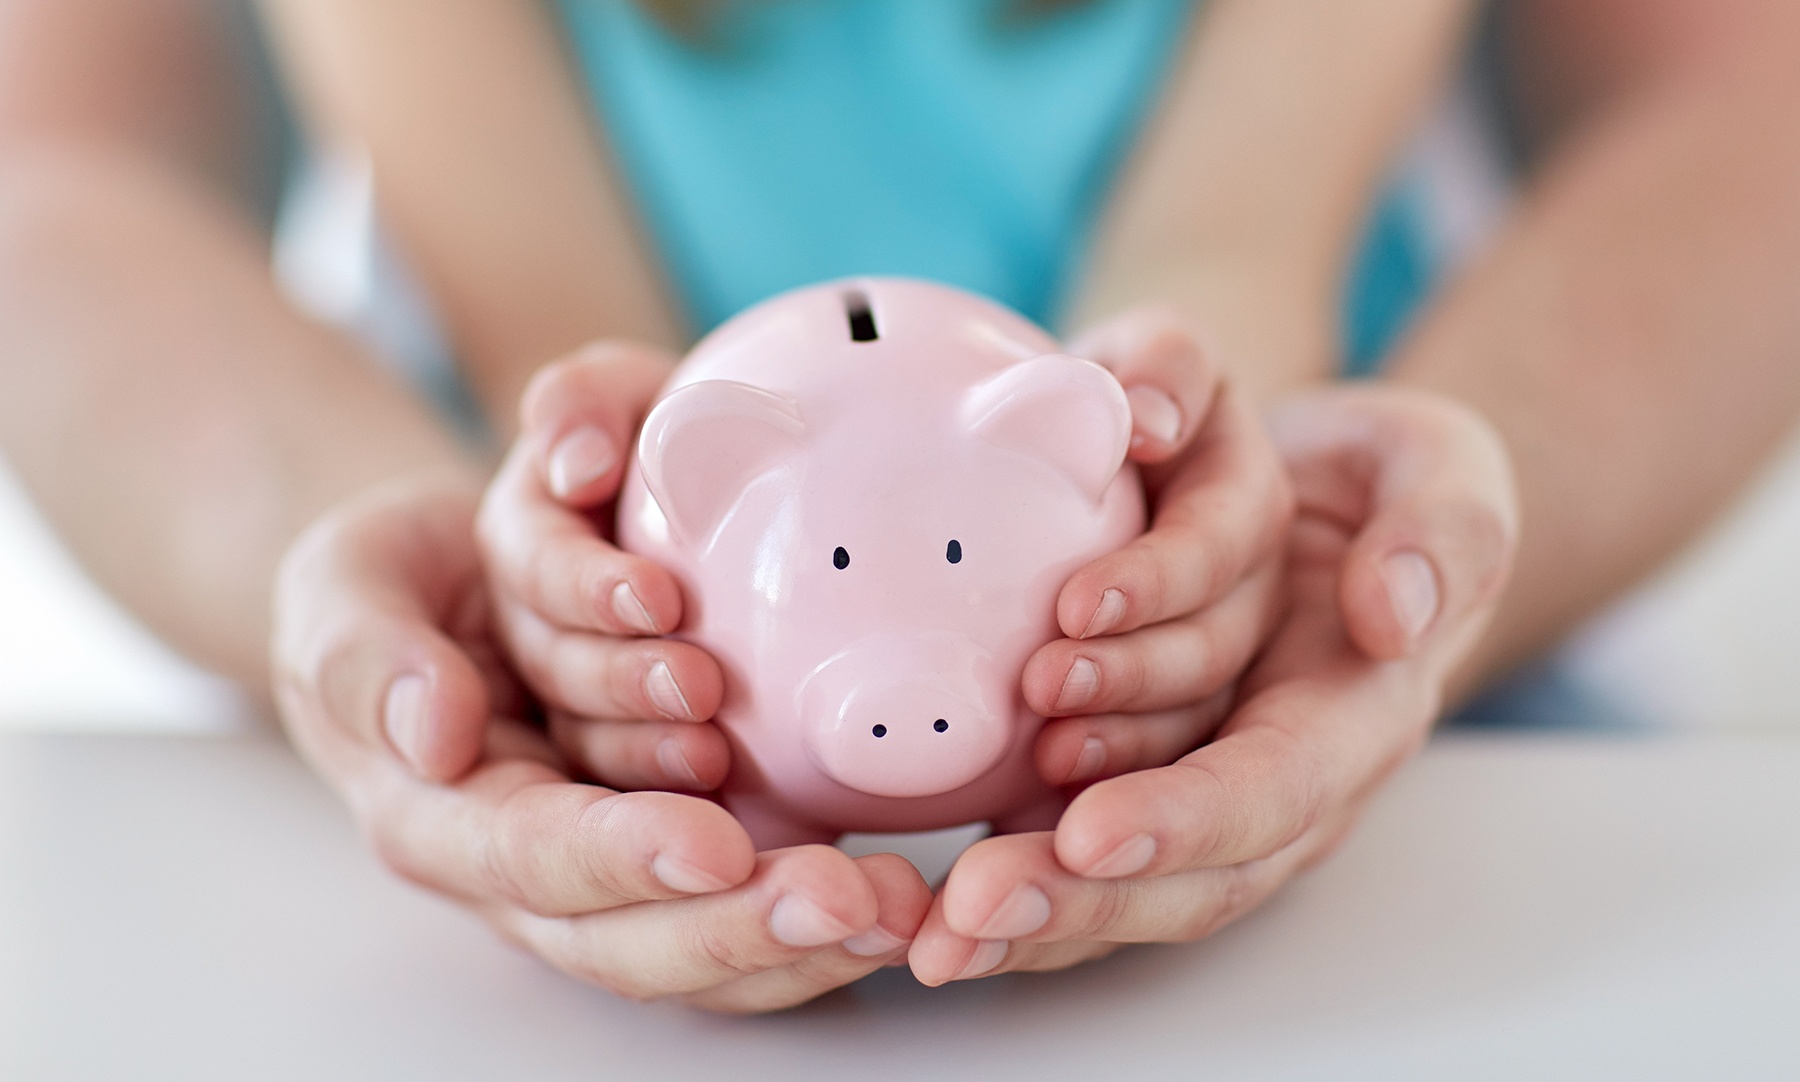 4 Ways To Teach Your Children About Money from a Catholic Perspective